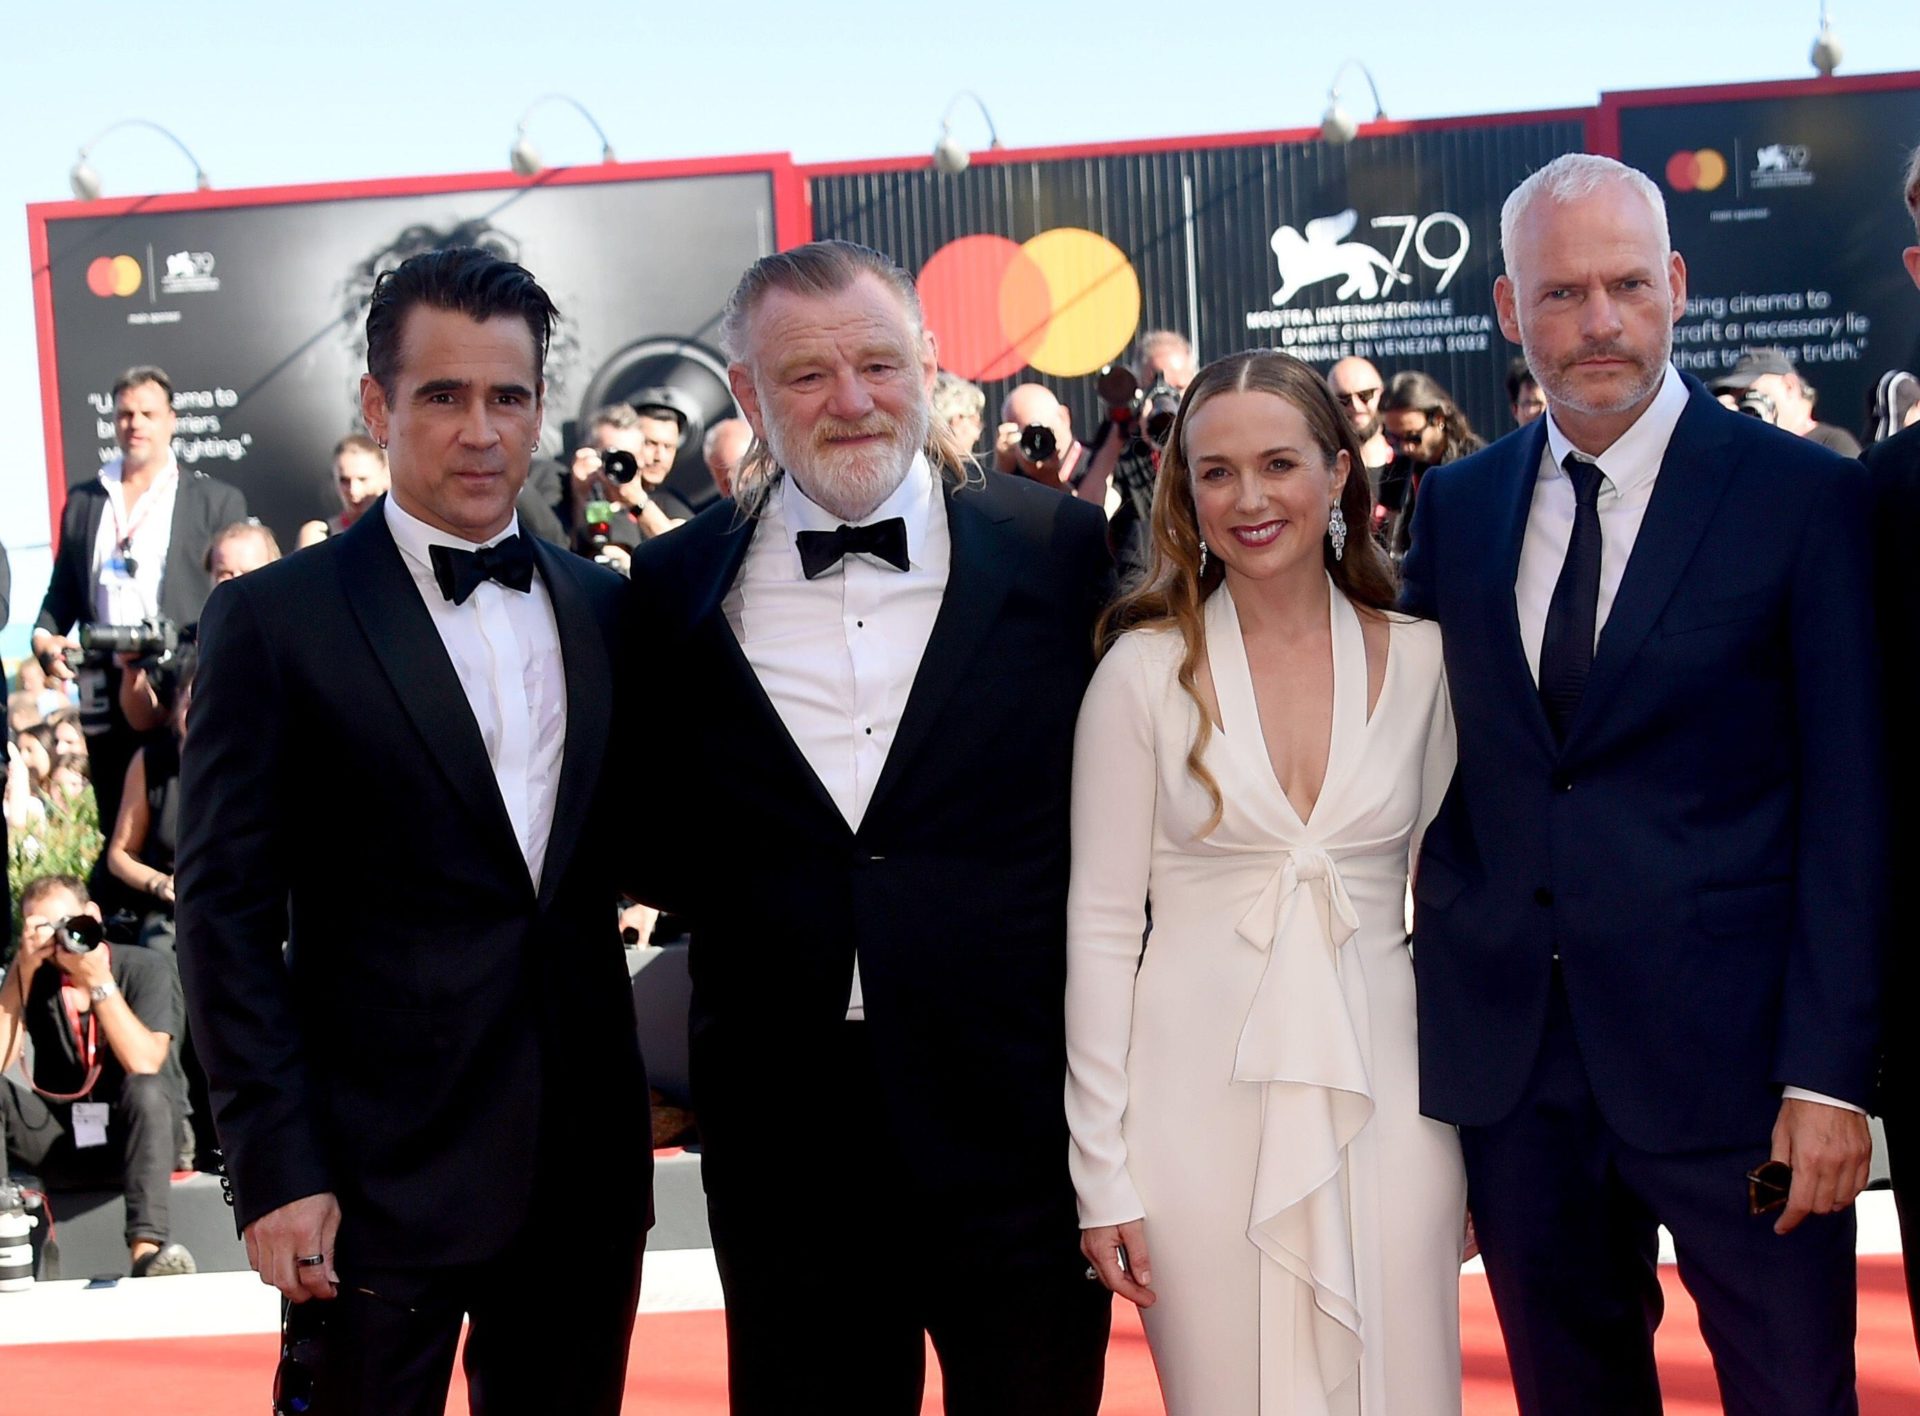 Some of the cast of The Banshees of Inisherin with Martin McDonagh (right) at the 79th Venice Film Festival in Venice, Italy in September 2022.